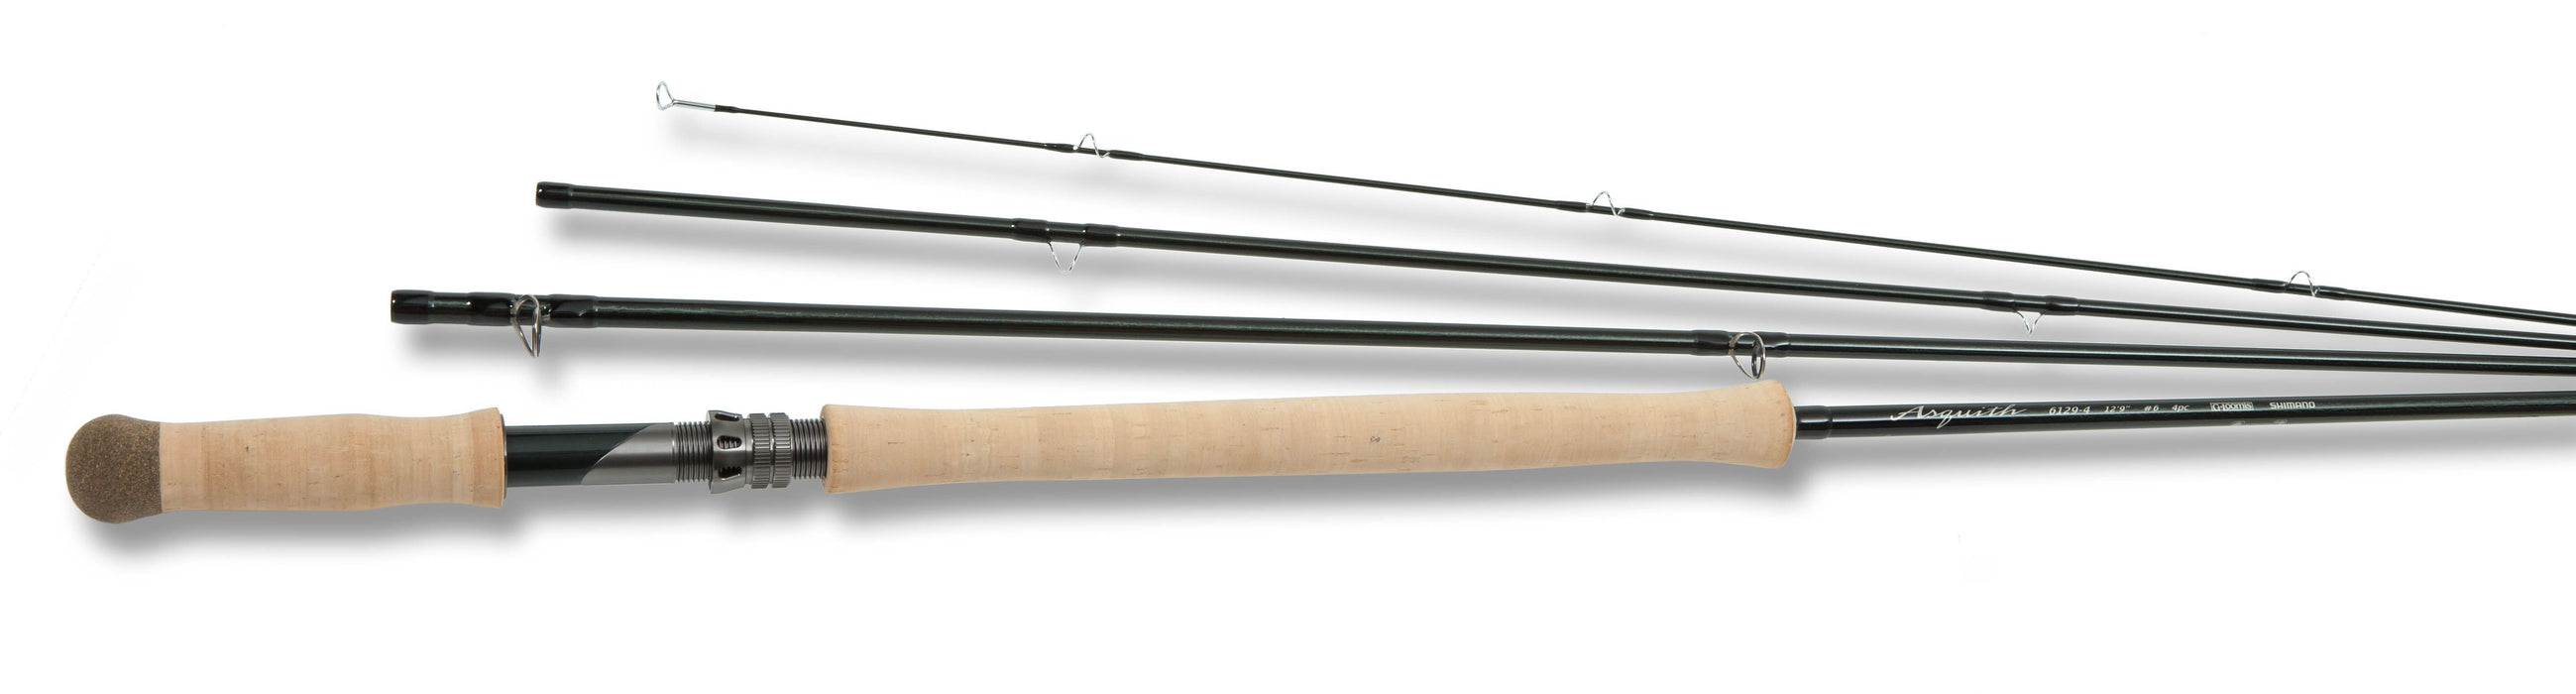 G Loomis Asquith Spey Fly Rod - 6129-4